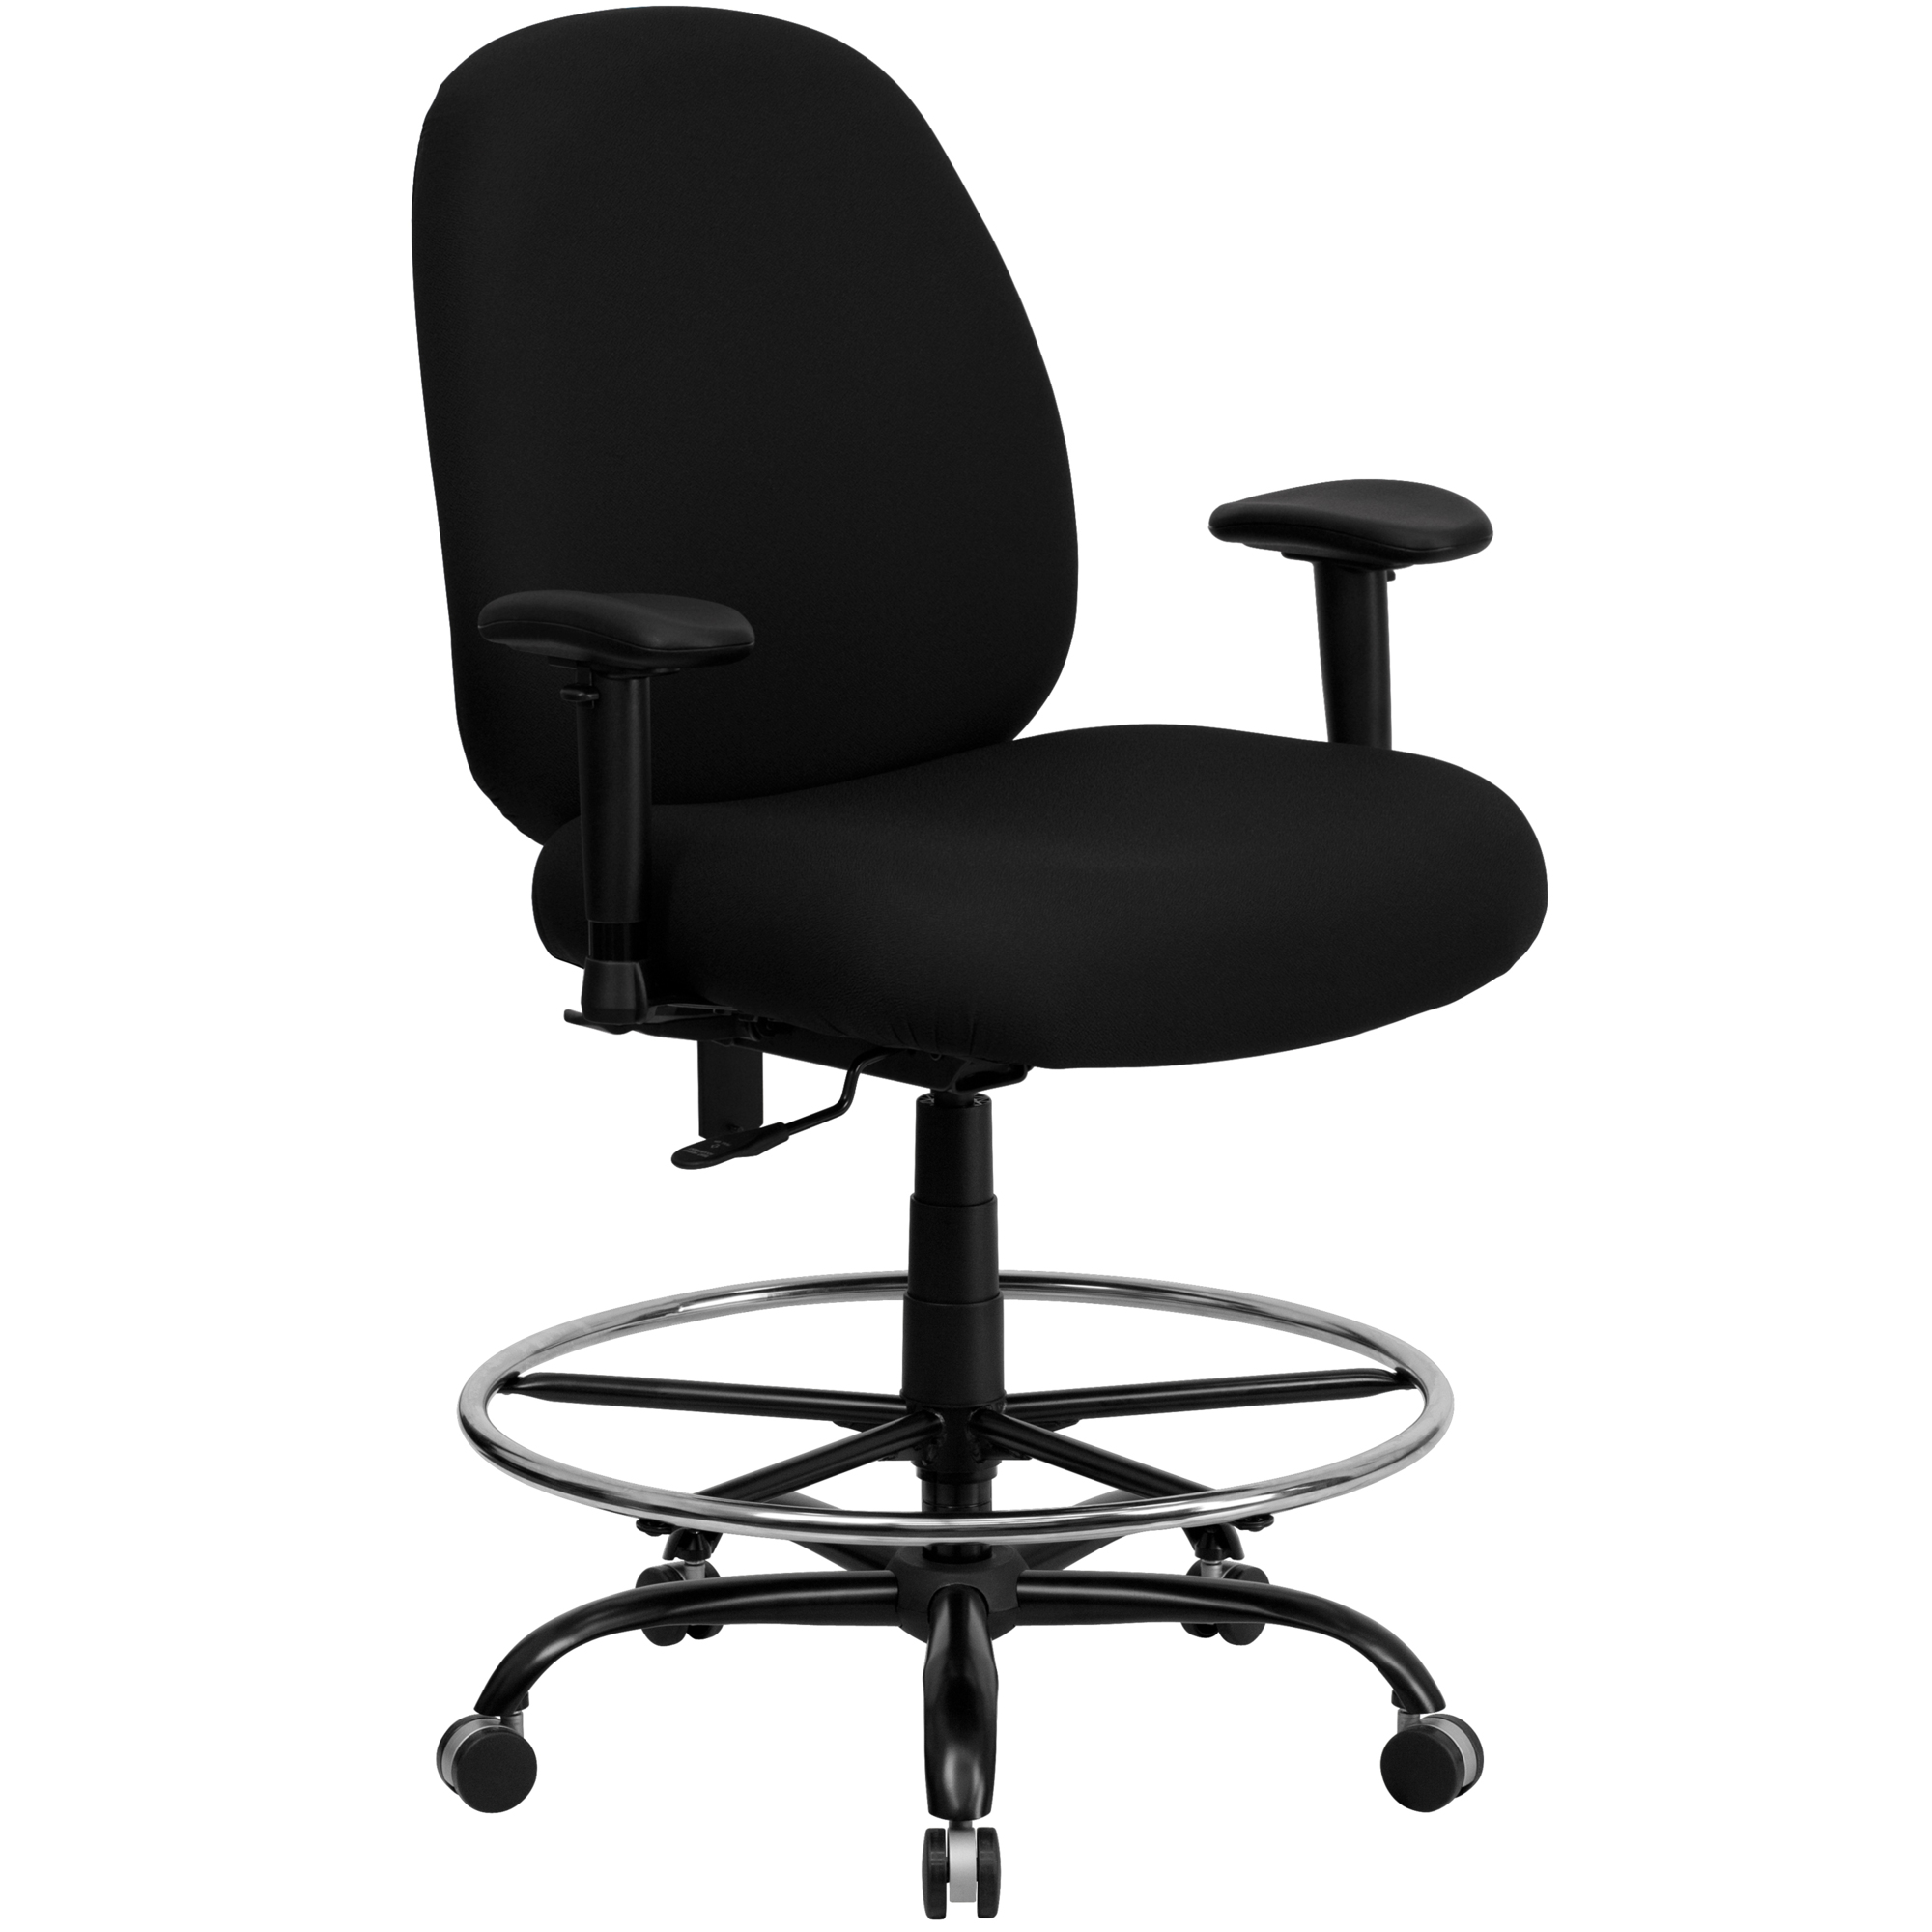 Flash Furniture, Big Tall 400 lb. Rated Black Fabric Chair, Primary Color Black, Included (qty.) 1, Model WL715MGBKAD